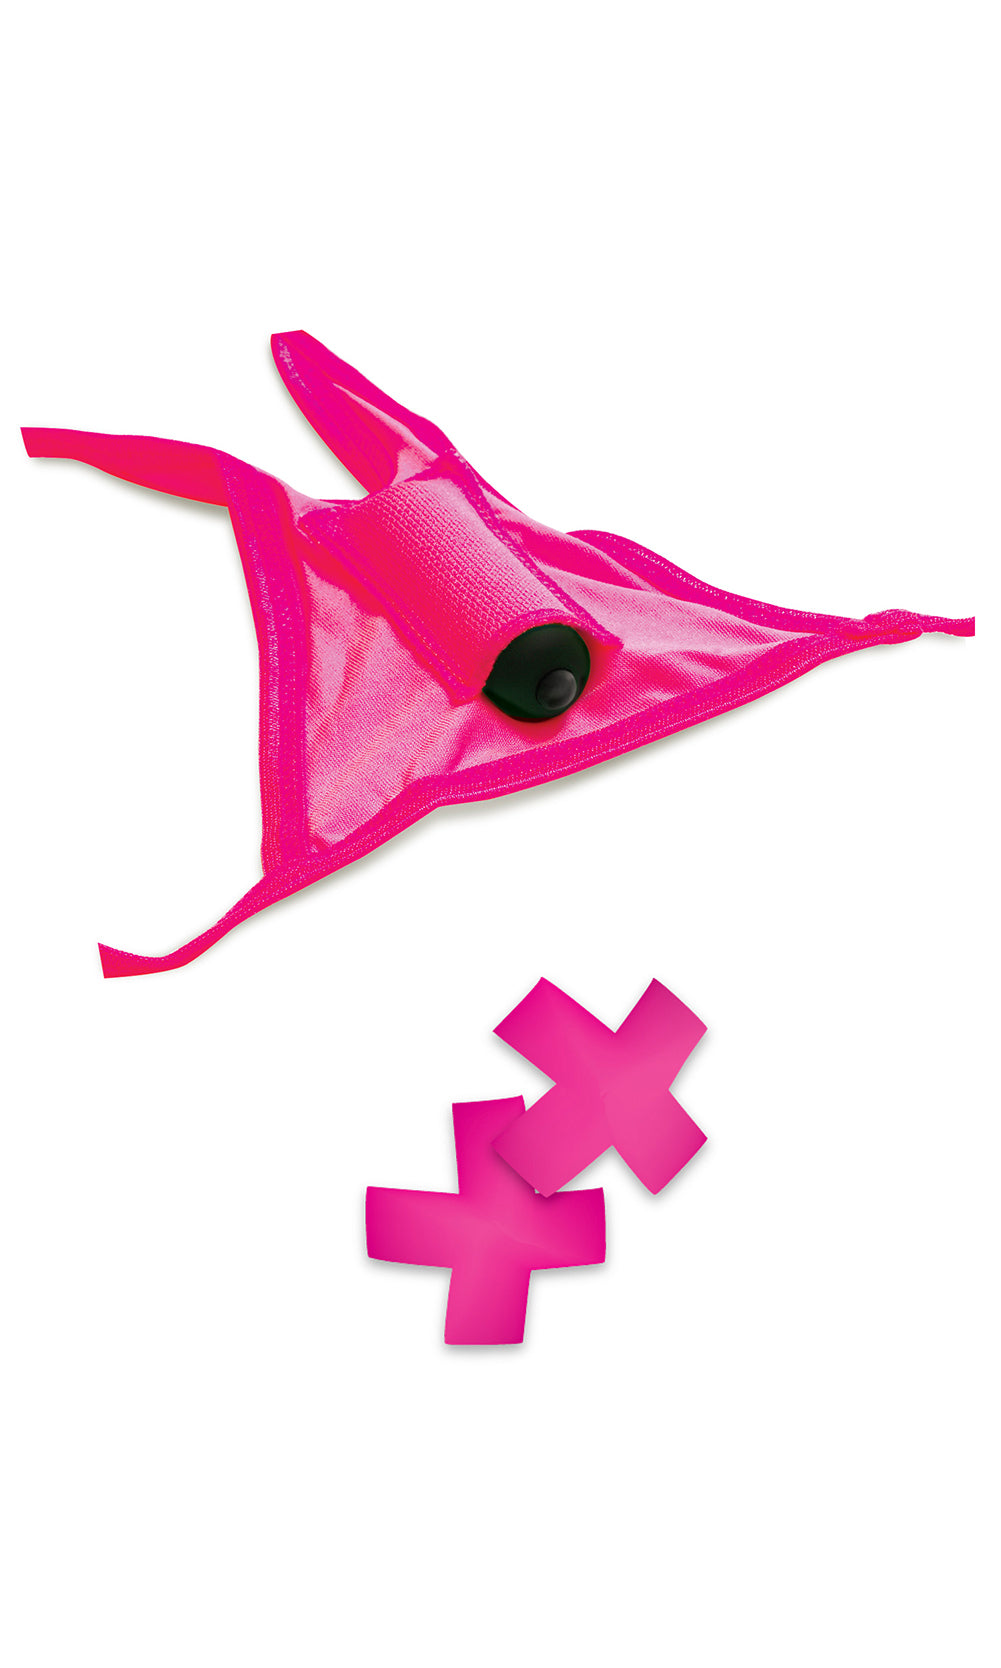 Neon Vibrating Crotchless Panty and Pasties Set Pink